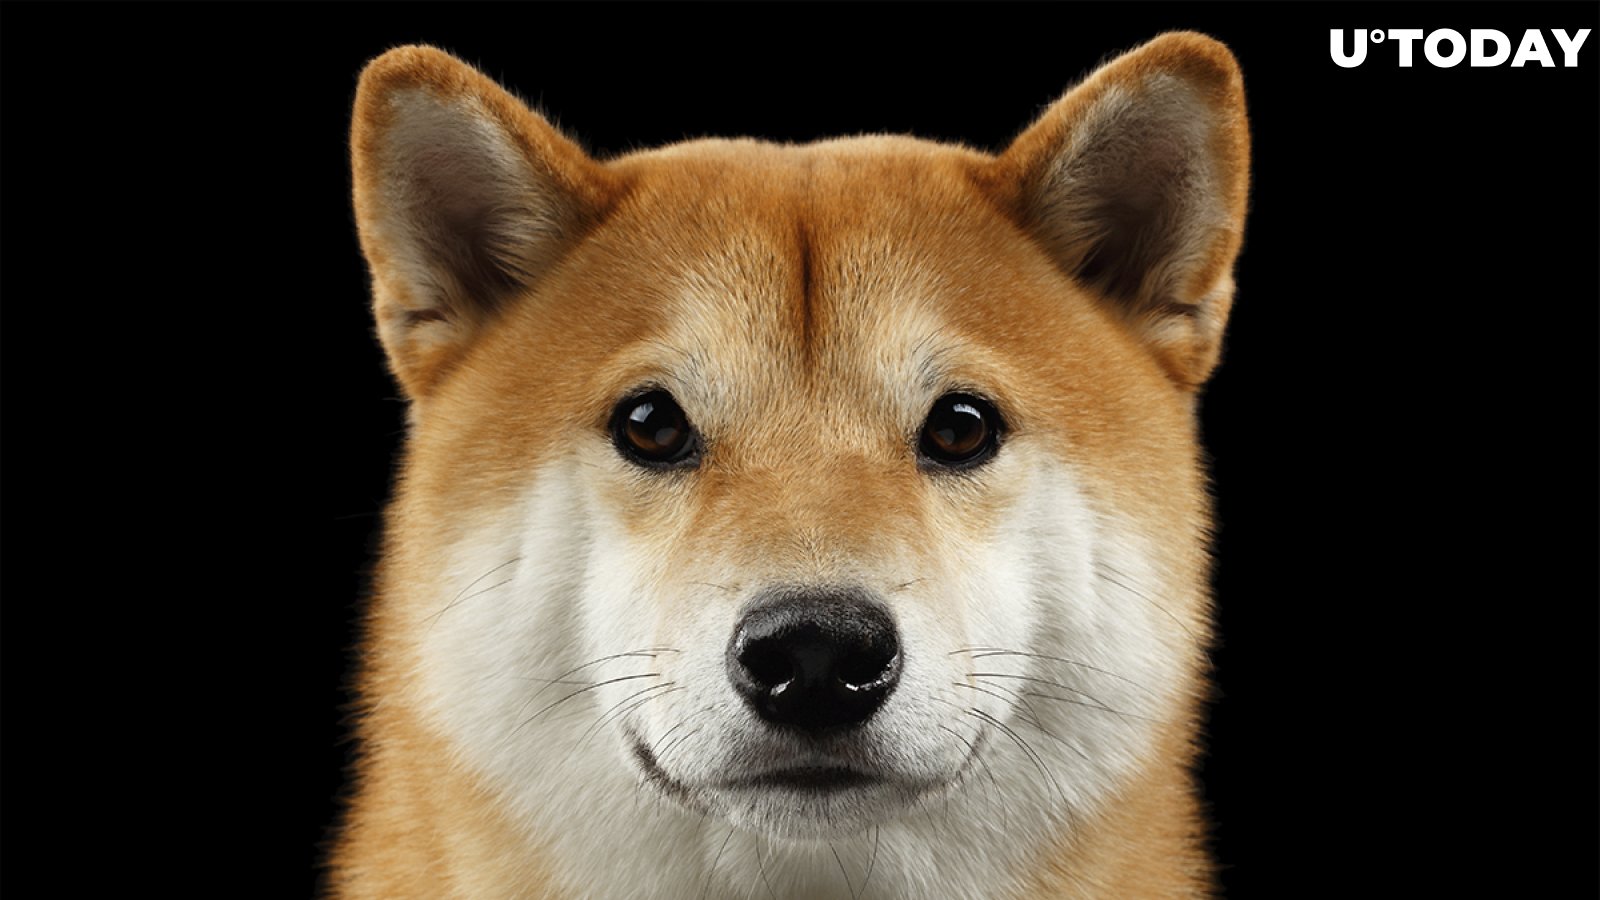 Comedy-Doc About Dogecoin and Shiba Inu Raises Funds in Less Than One Day